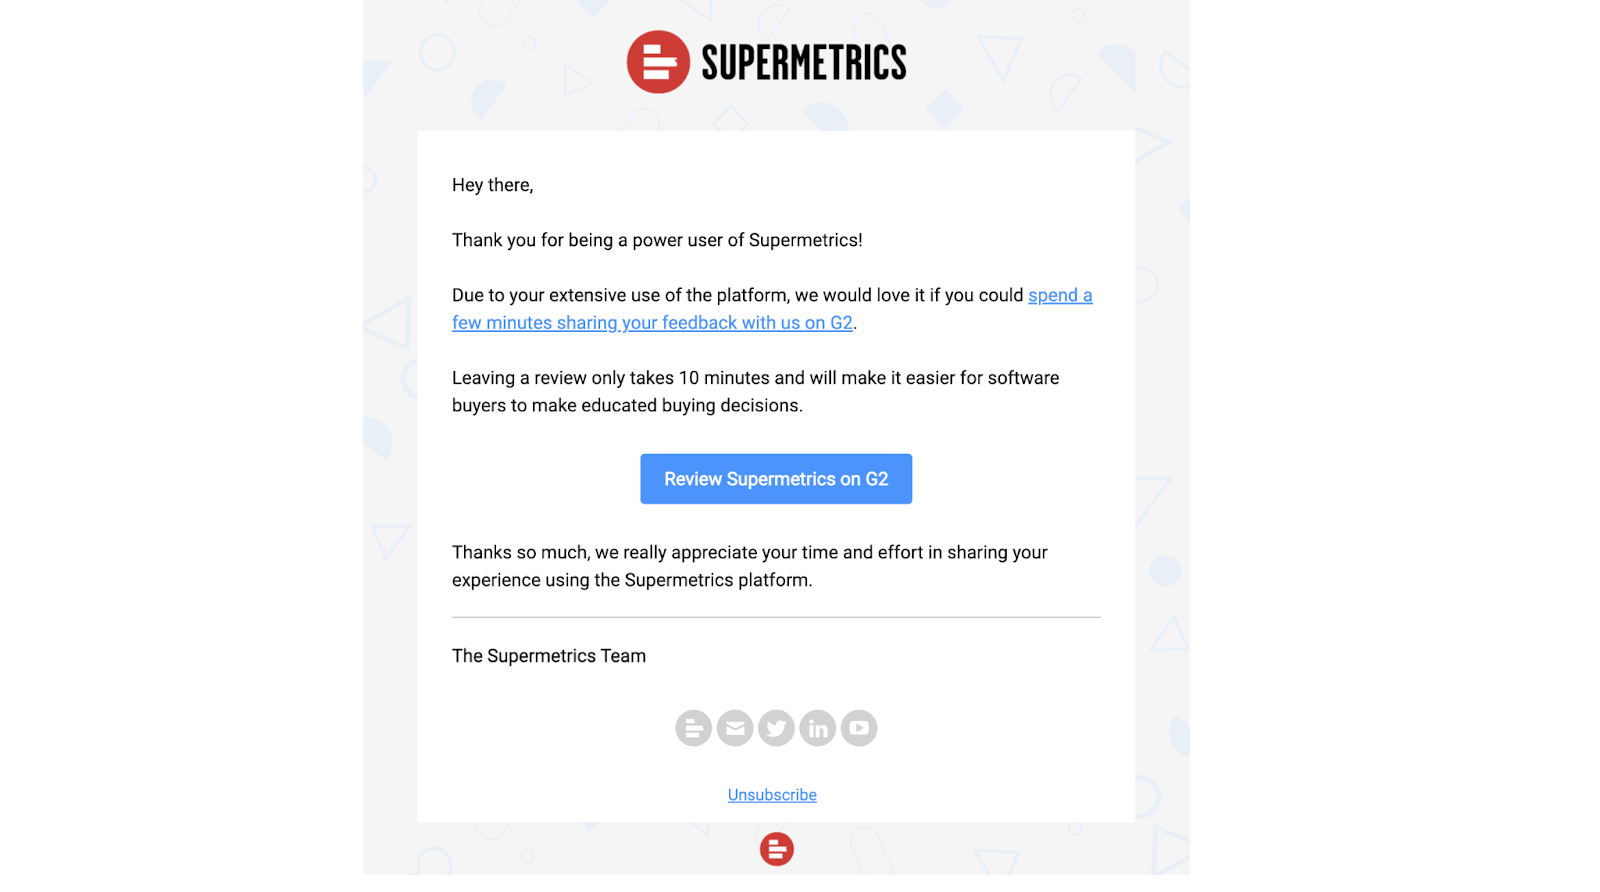 Email Engagement Content Ideas: Screenshot of Supermetric's email asking users to review them on G2